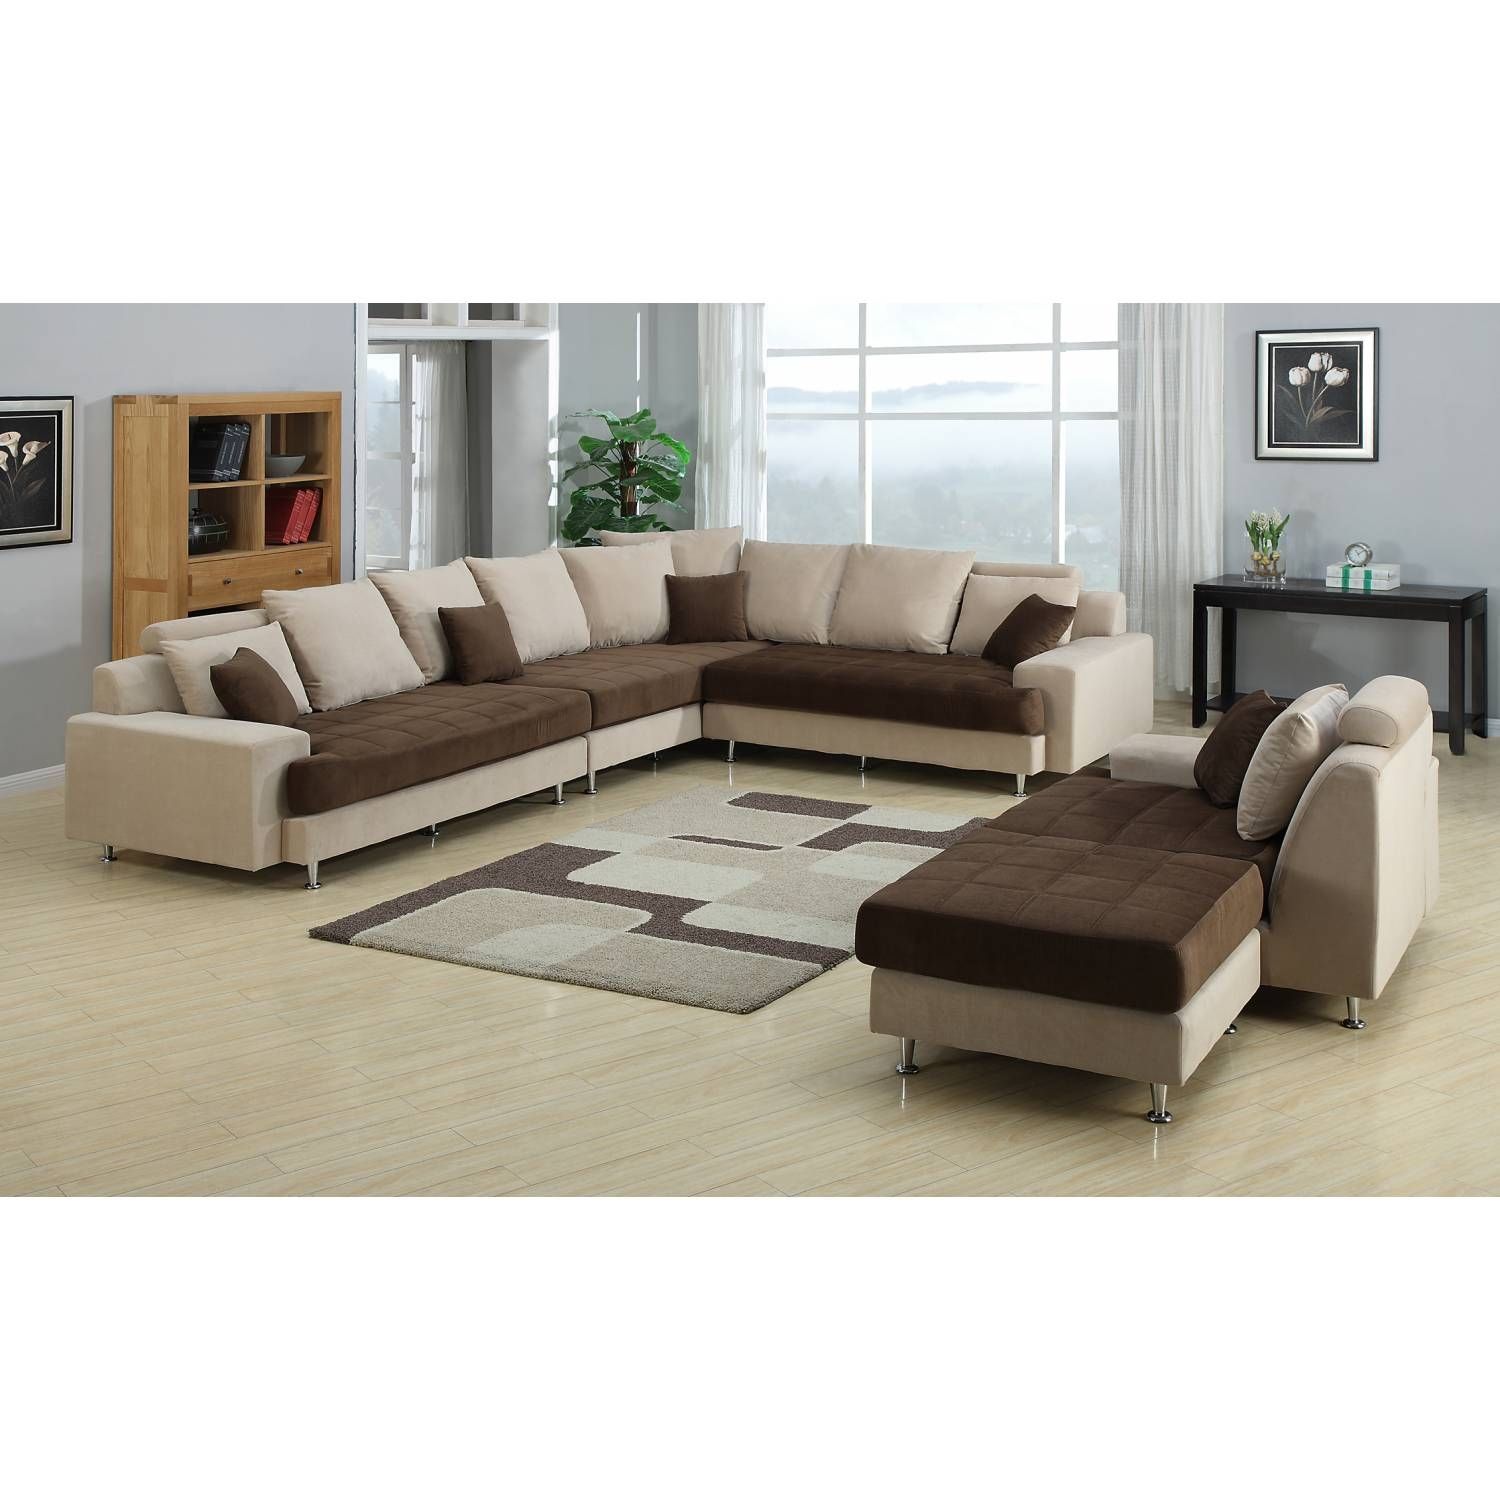 Sectional Sofa With Ottoman – Foter Throughout 2 Tone Chocolate Microfiber Sofas (Photo 13 of 15)